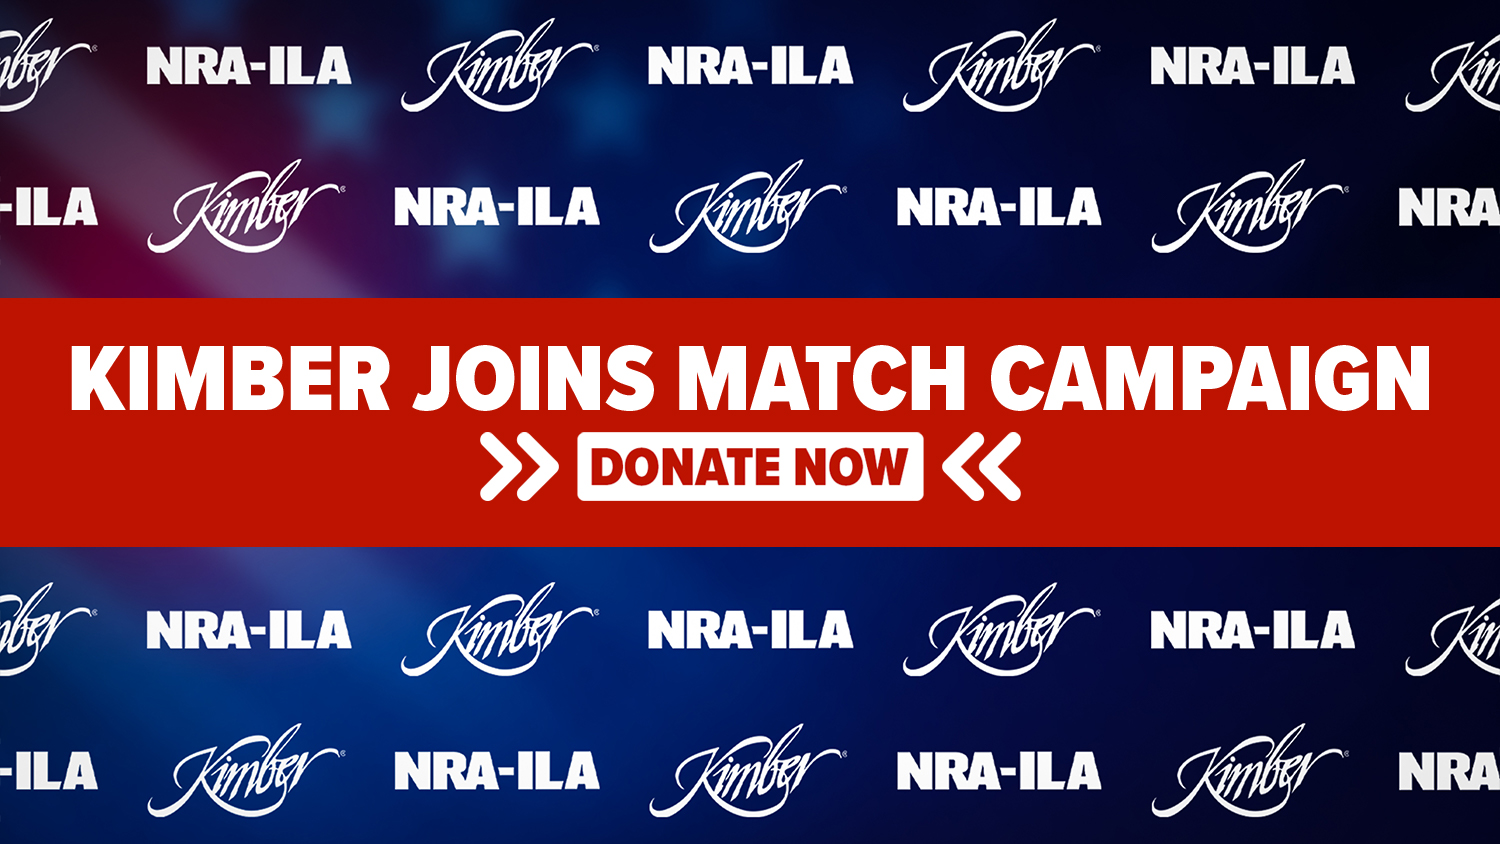 Kimber Partners with NRA-ILA in Donation Match Campaign 